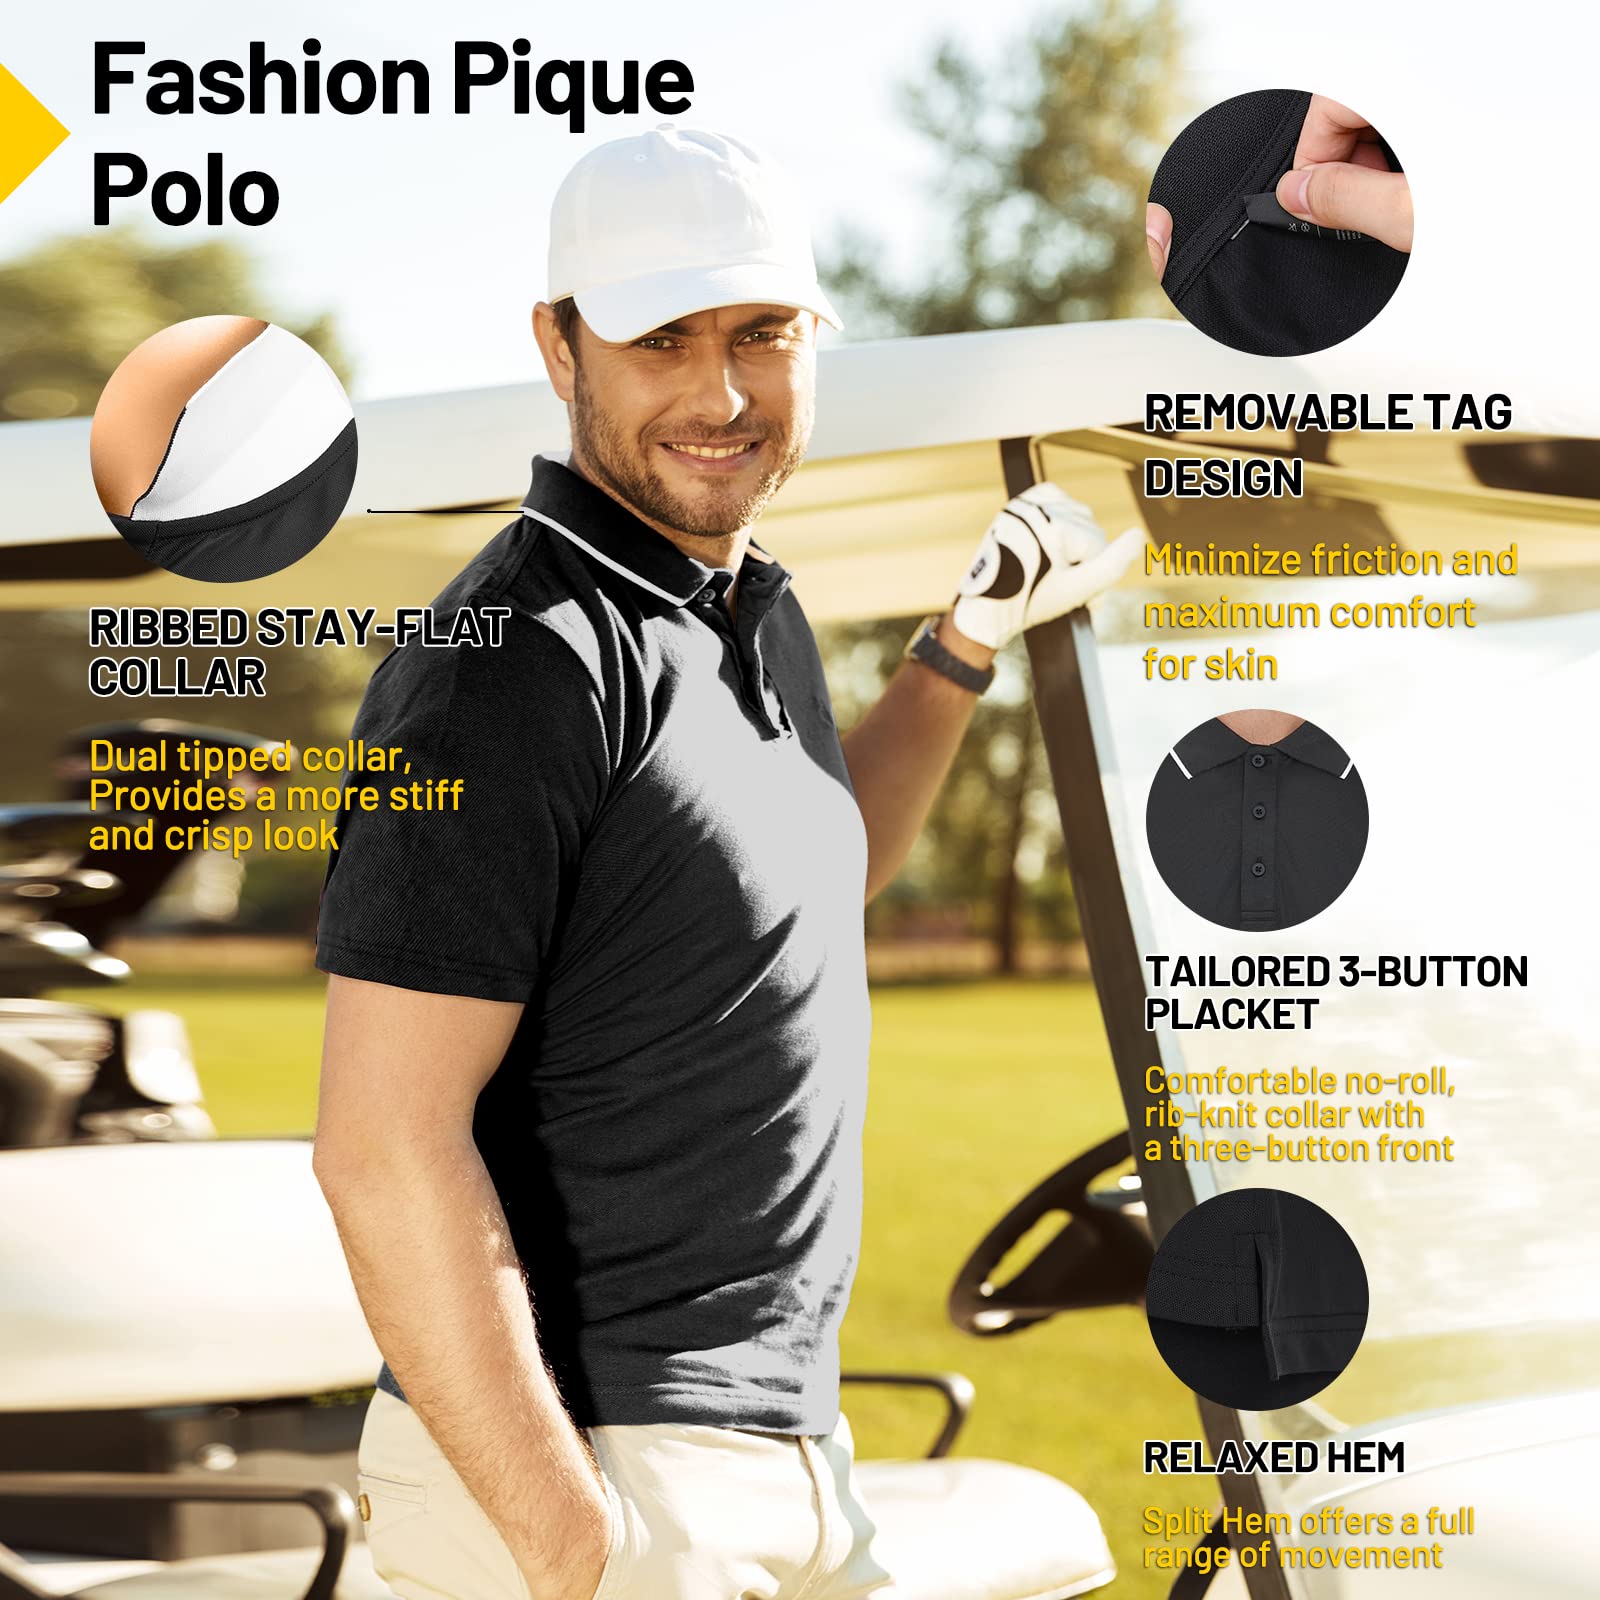 Golf Shirts for Men: Designed with Comfort & Style